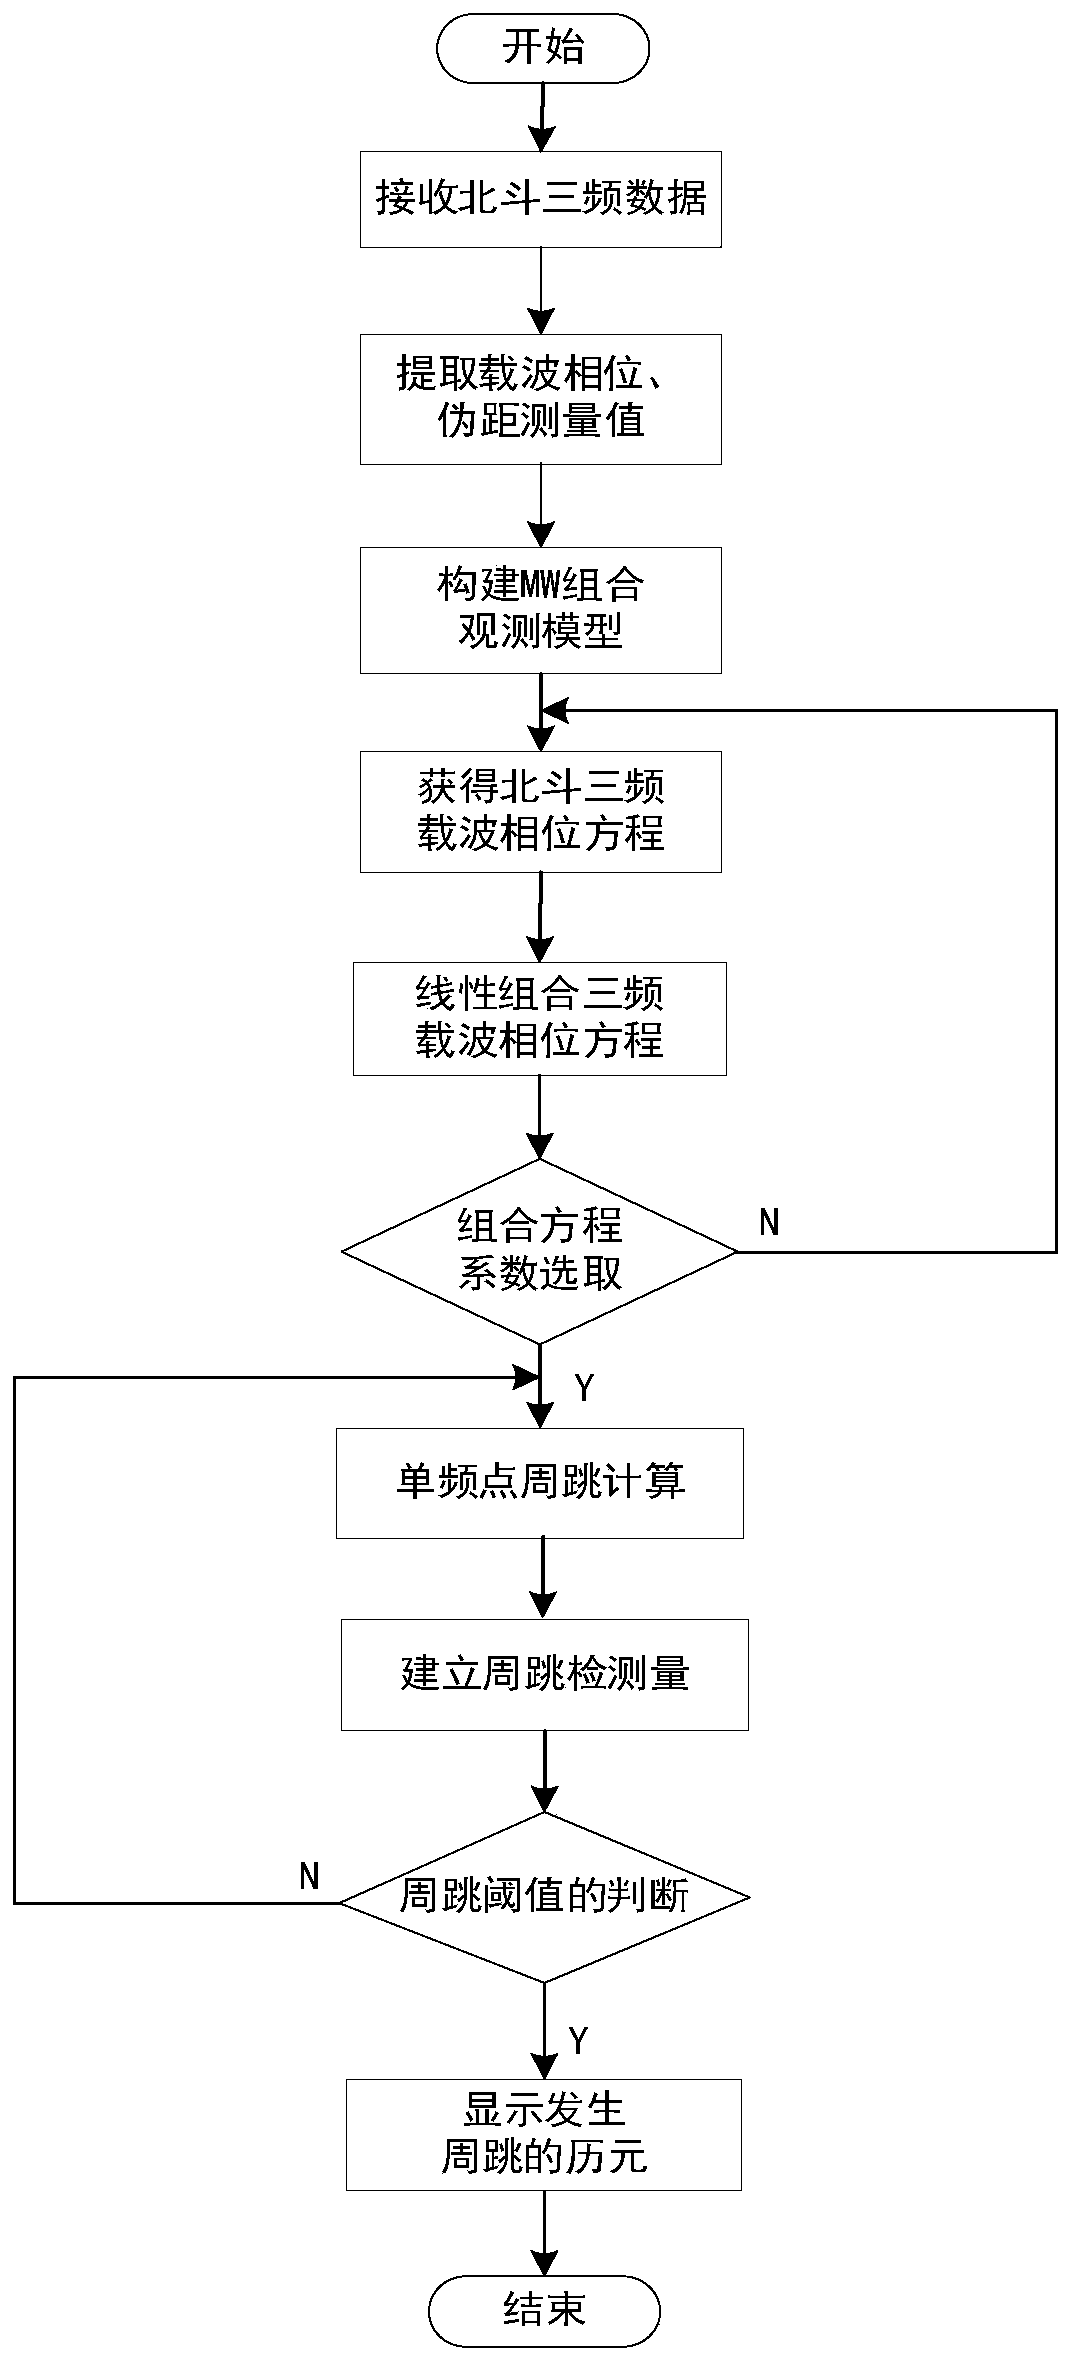 Method for jointly detecting and repairing cycle slip by MW combination method and non-geometric phase method